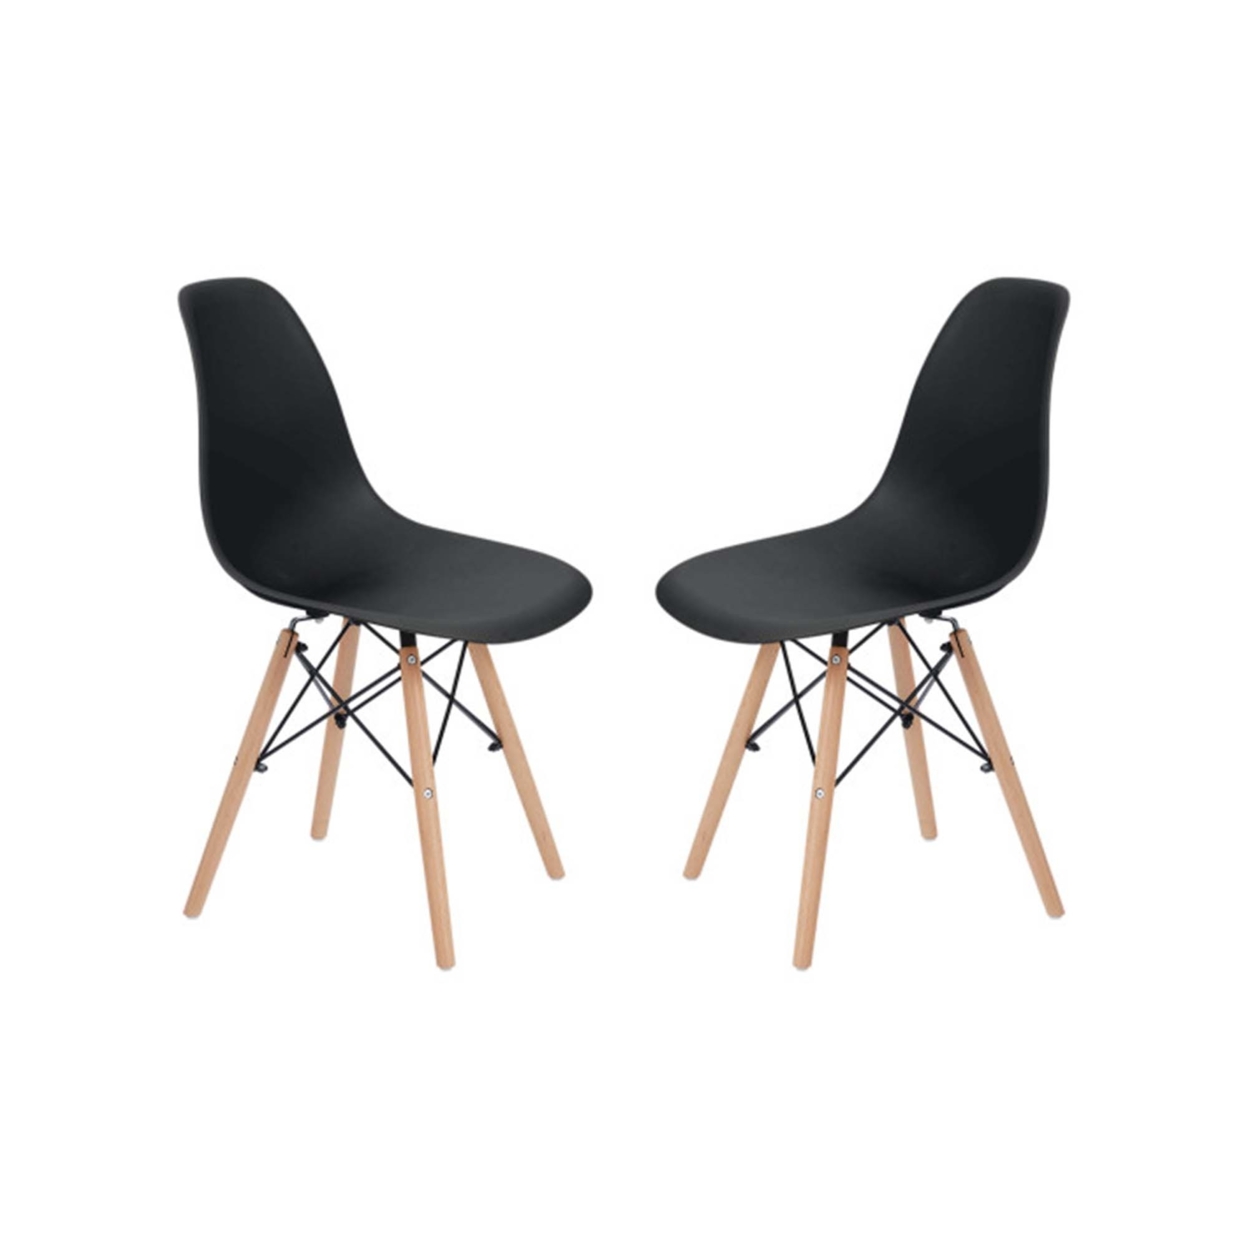 Allan Side Dining Chair with Wood Legs